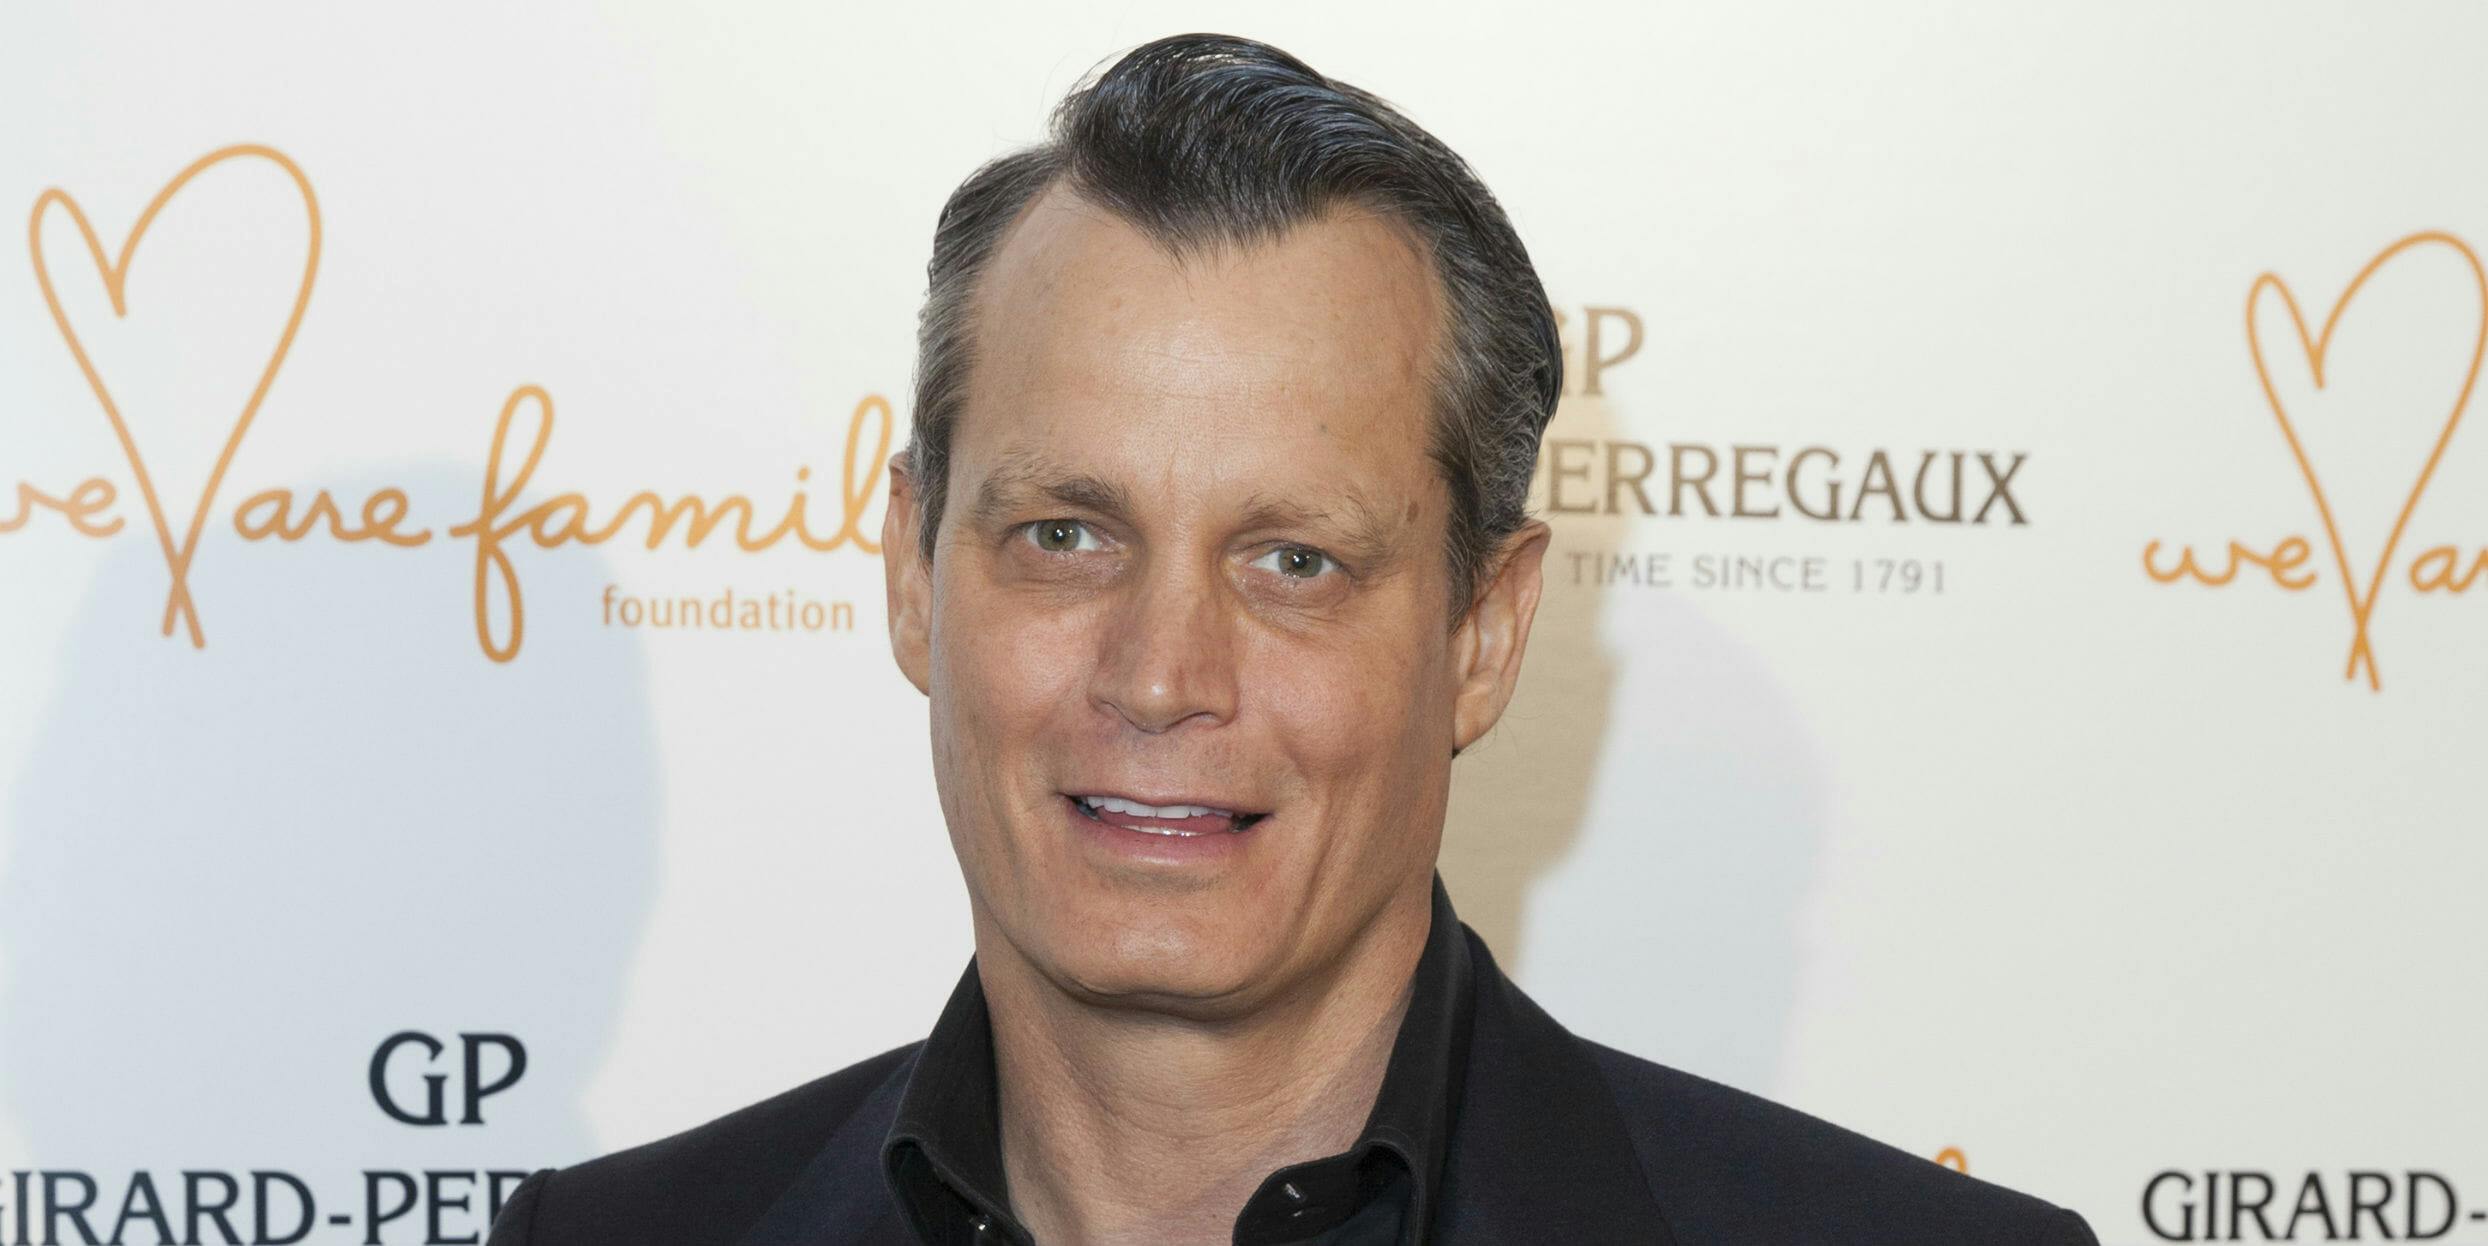 matthew mellon crypto currency cant find codes